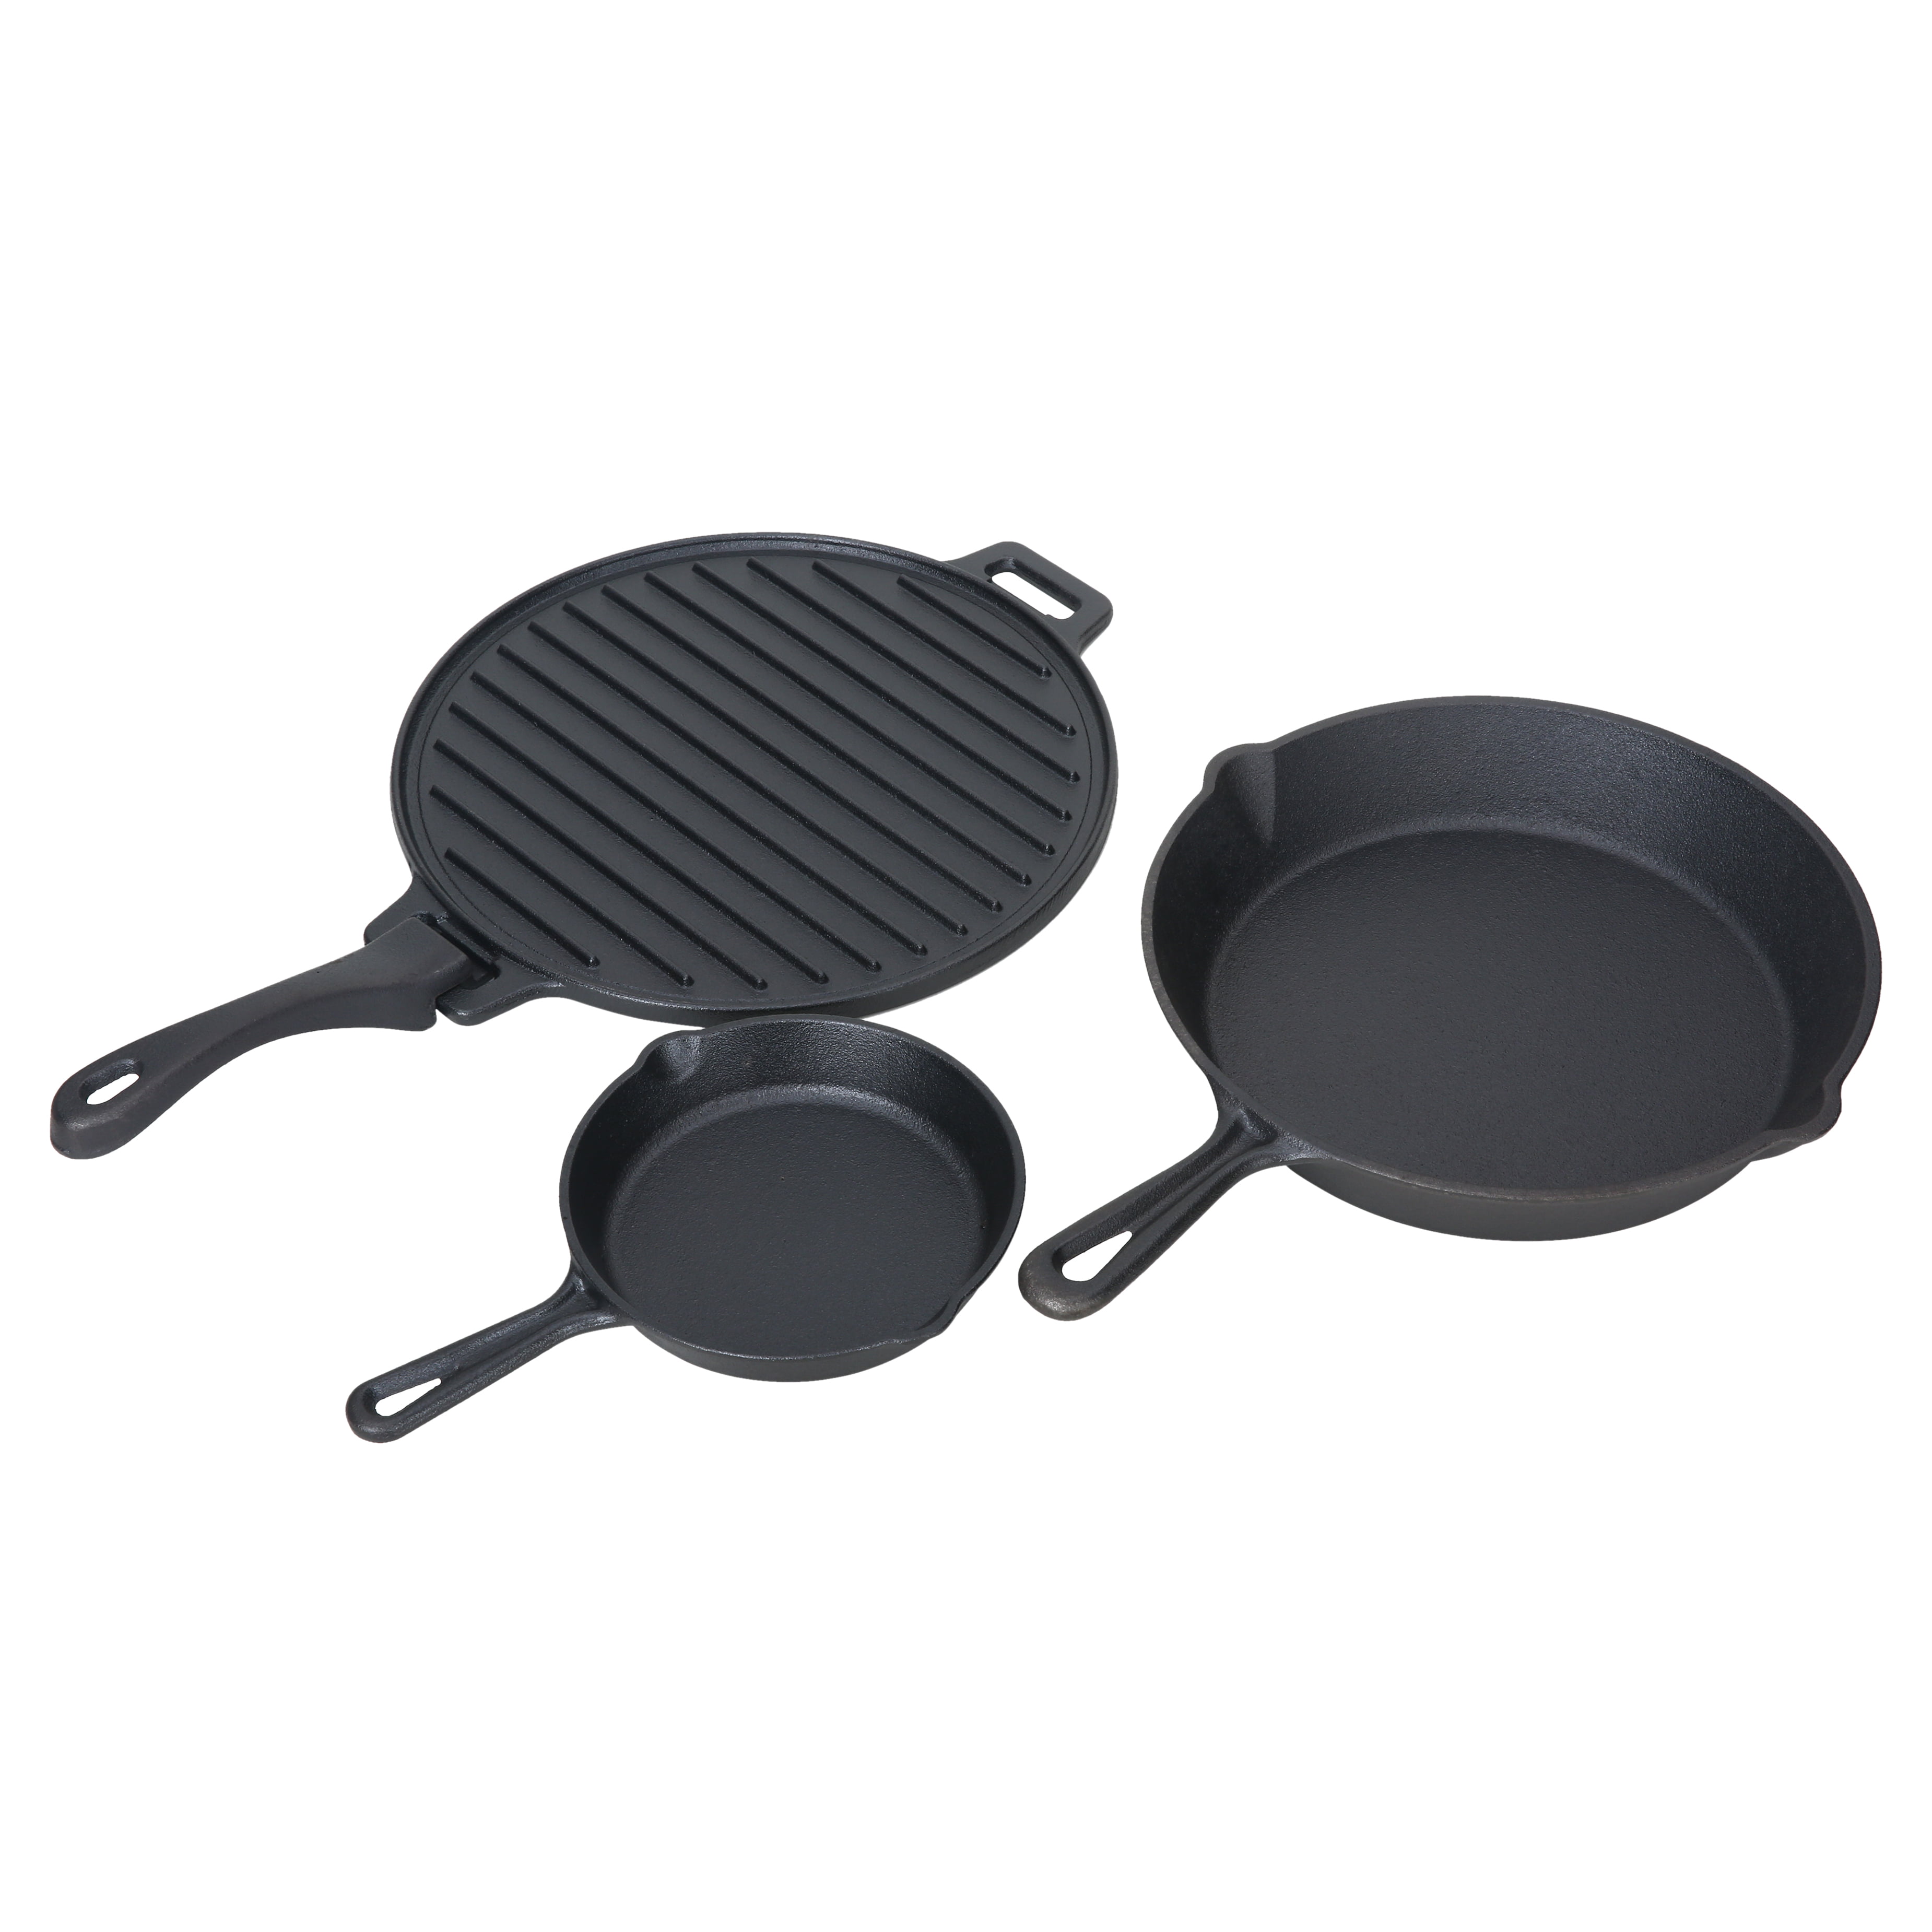 Pre-seasoned 10.5 inch Cast Iron Grill Pan with Assist Handle Kitchen Cookware 